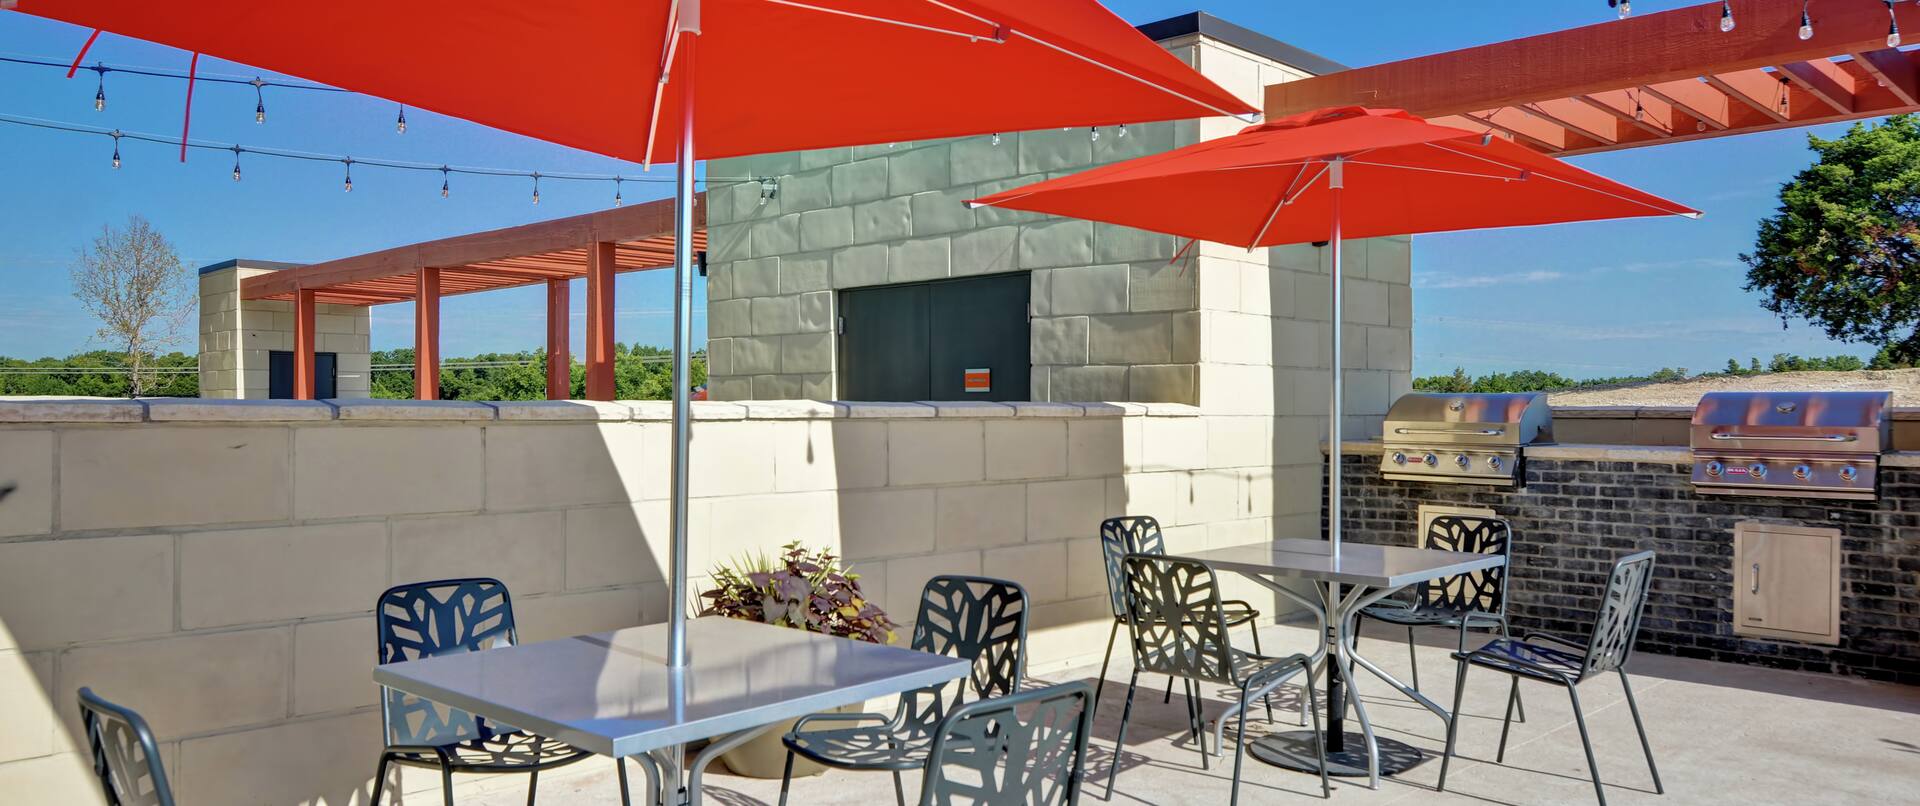 Outdoor patio with seating and grills